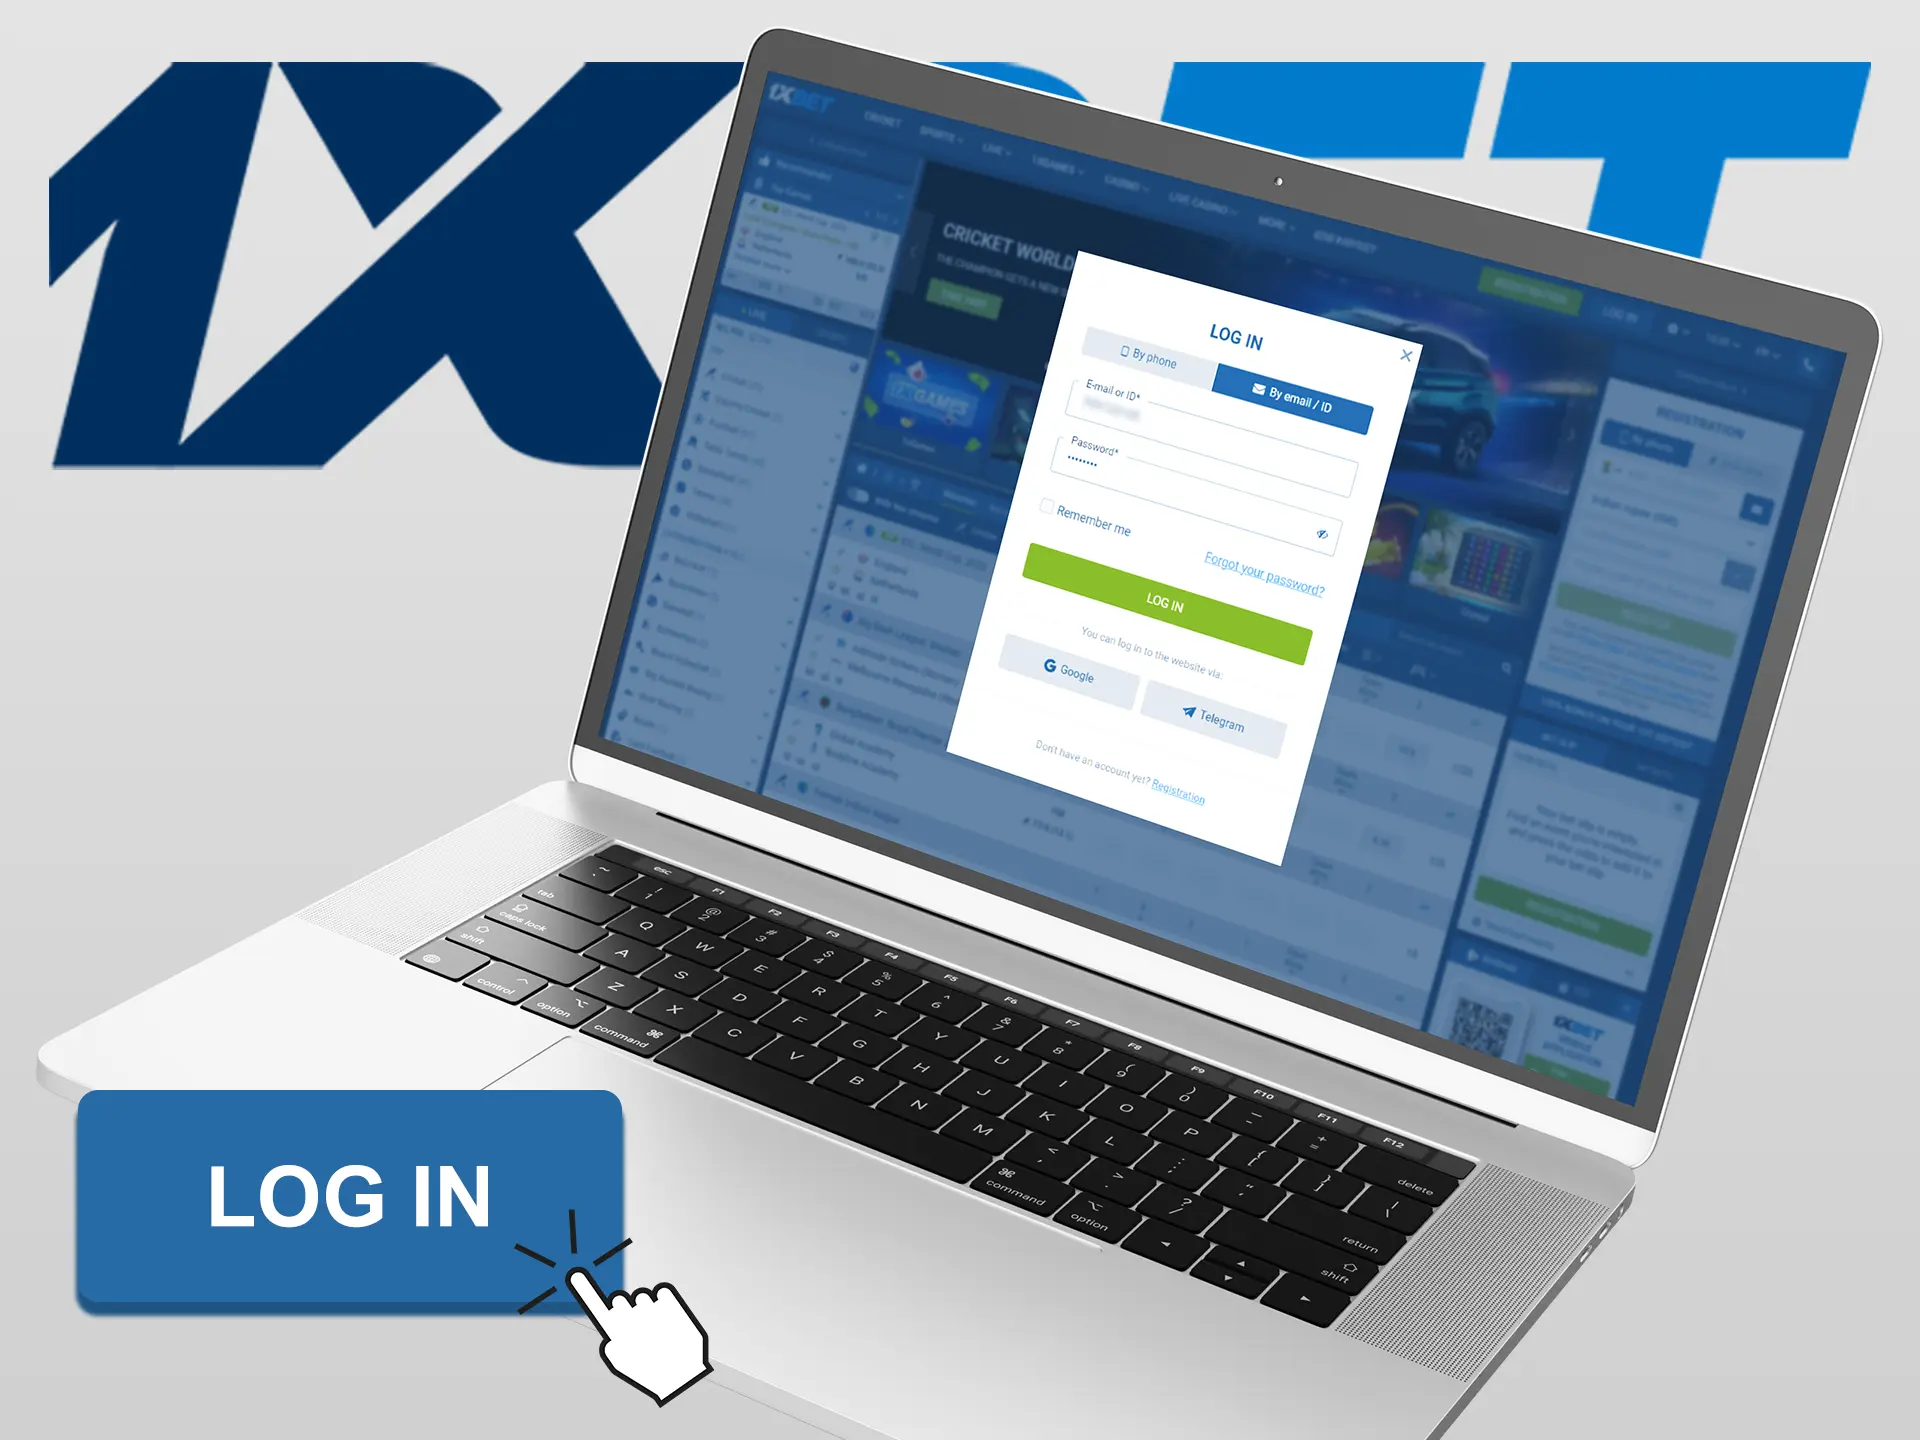 1xBet offers several options for logging in to your personal cabinet.